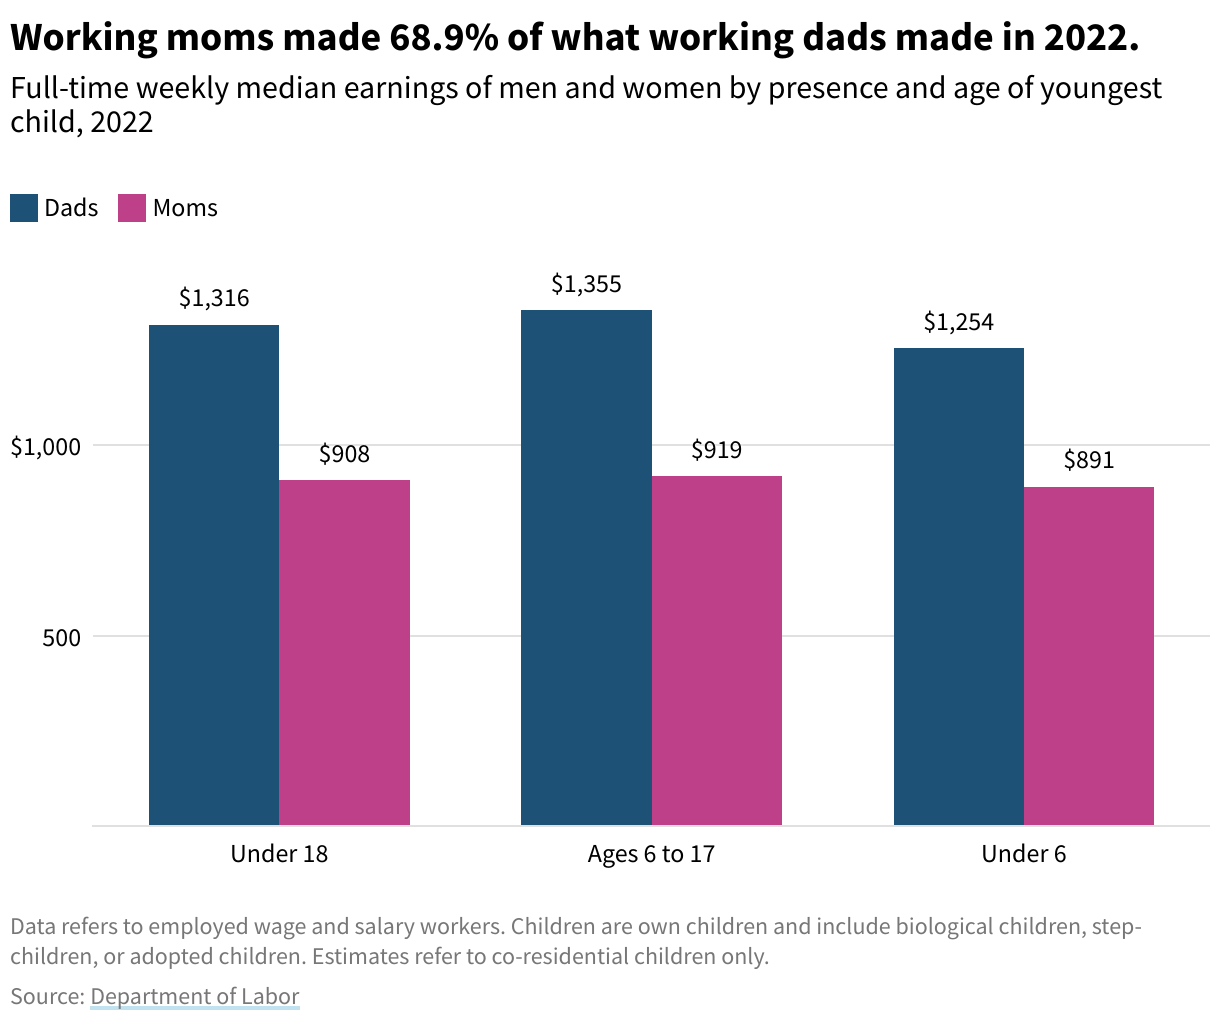 Column chart comparing full-time weekly median earnings of men and women by presence and age of youngest child, 2022. Working mothers made 68.9% of what working fathers made in 2022.